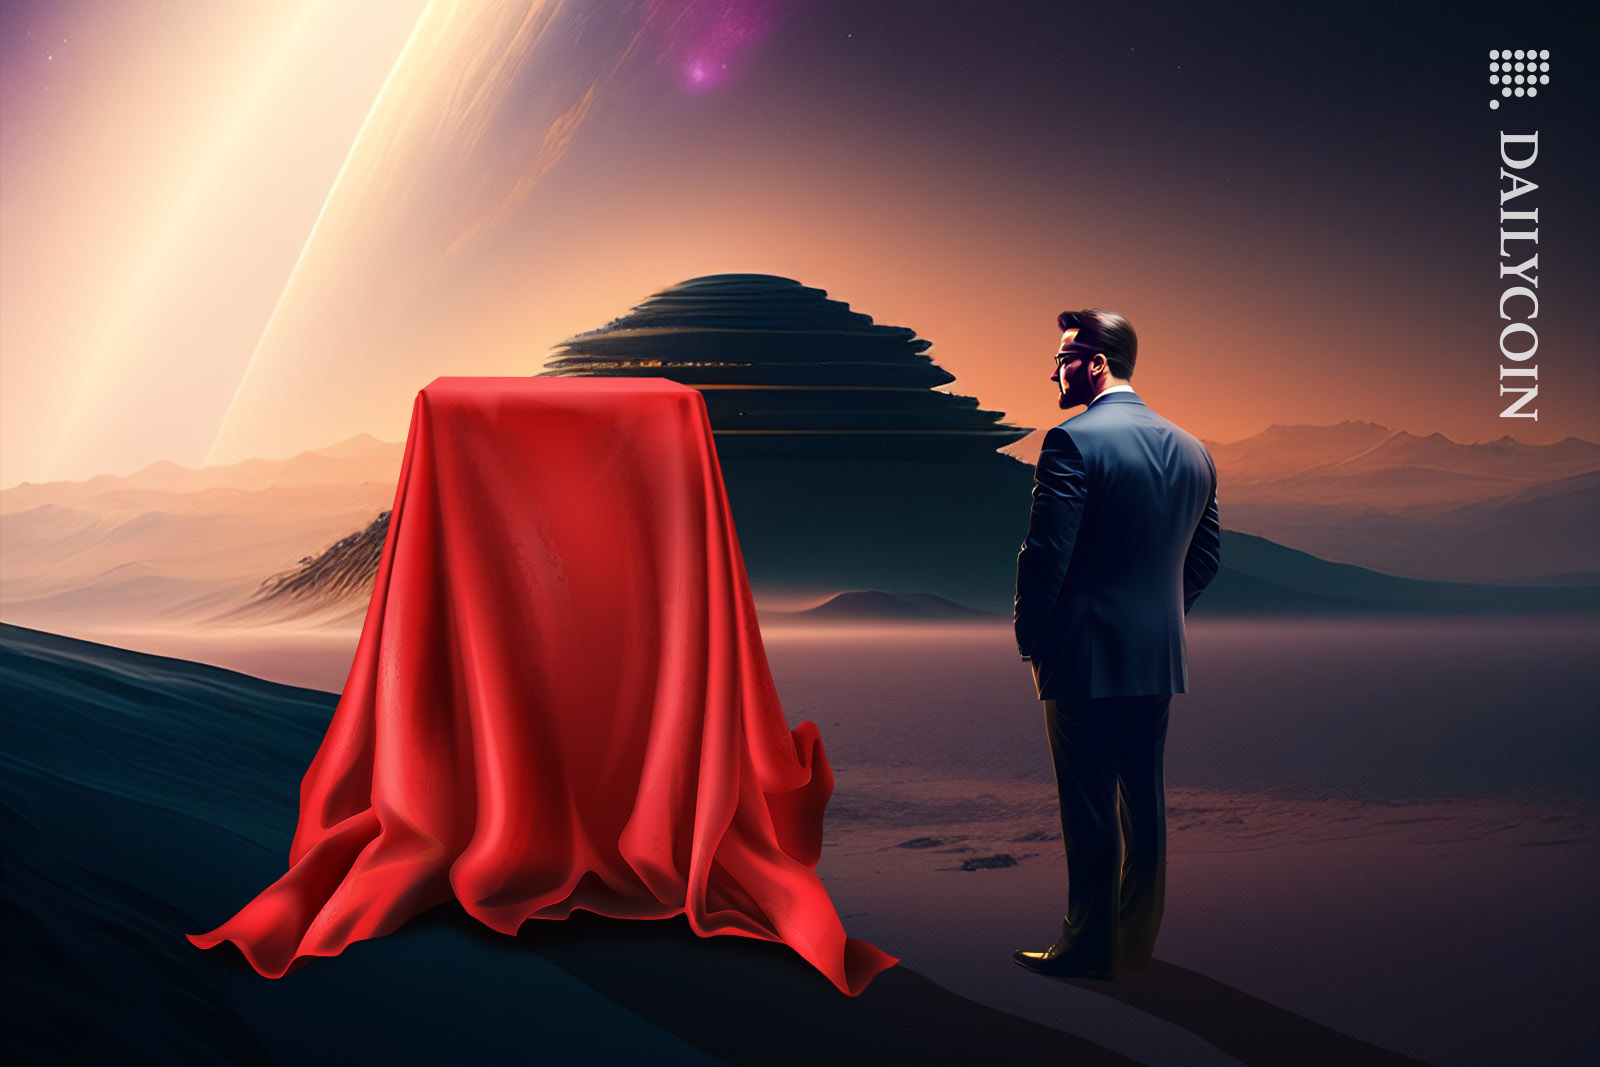 A man staring at a myterious object covered with a red cloth